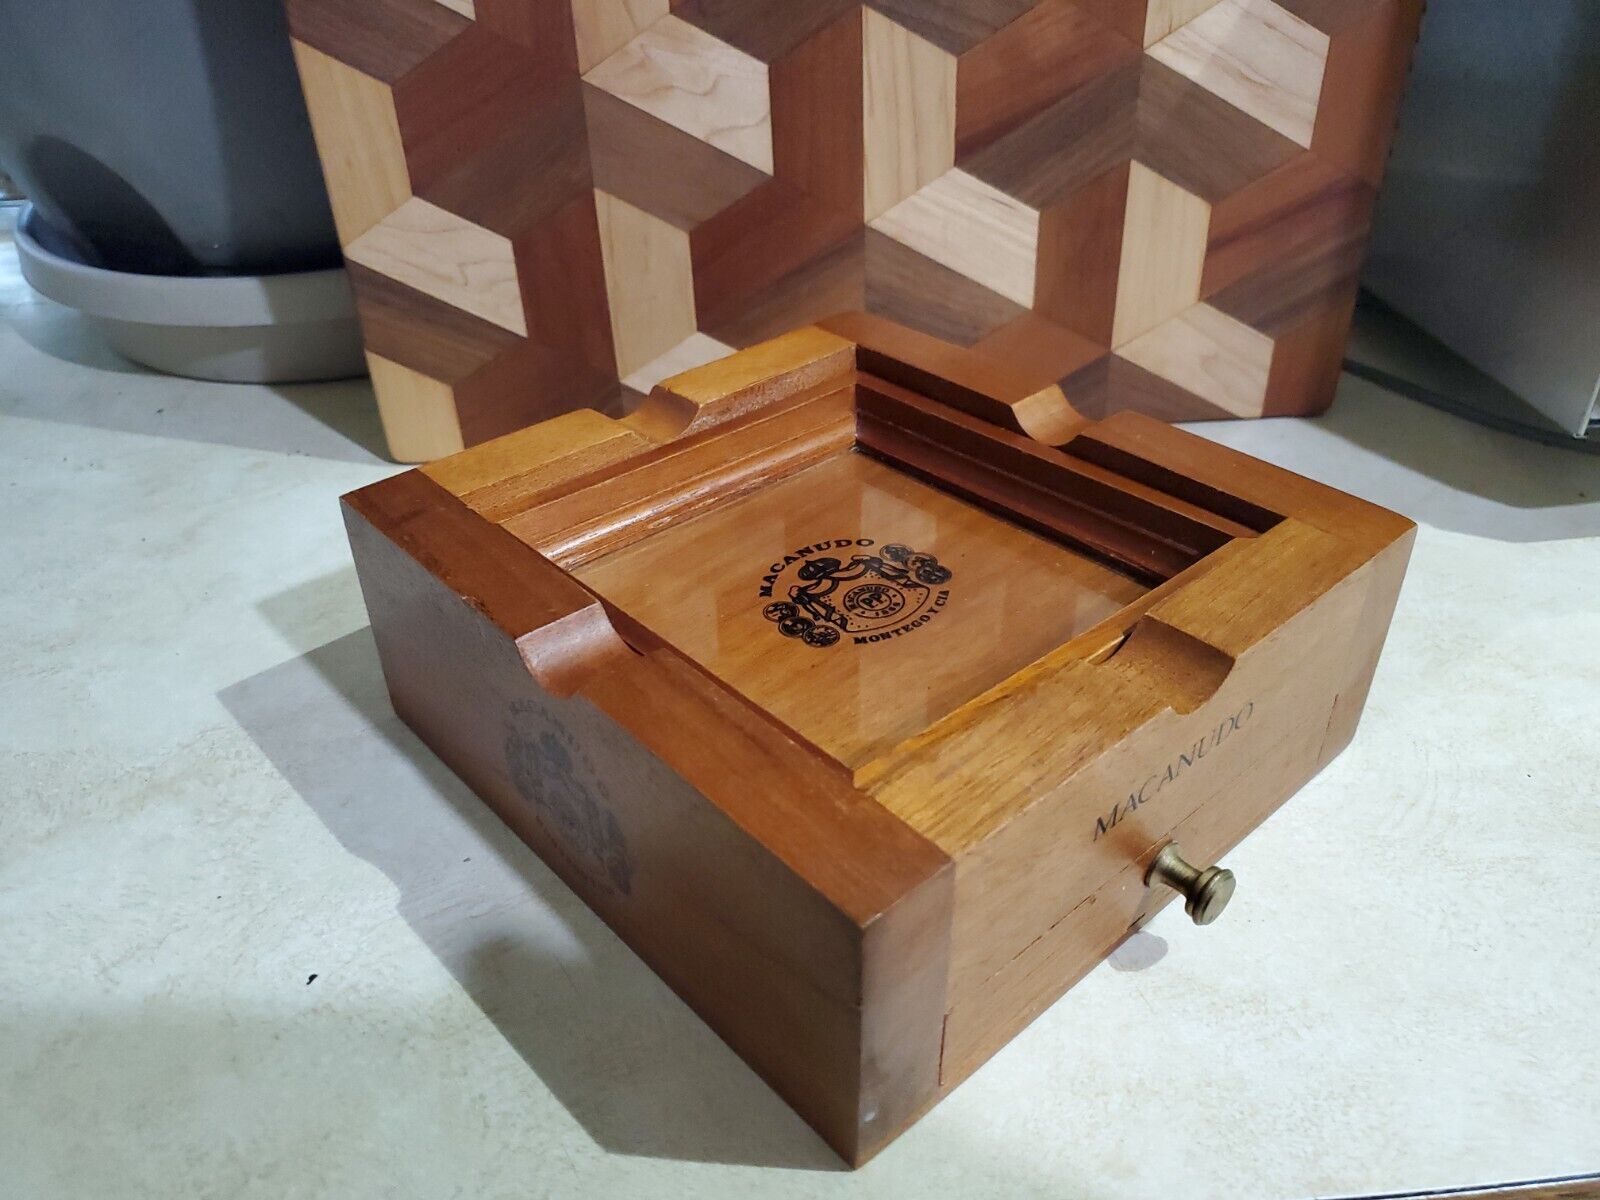 New Handmade Macanudo Wooden ashtray with drawer for accessories Made in D.R.